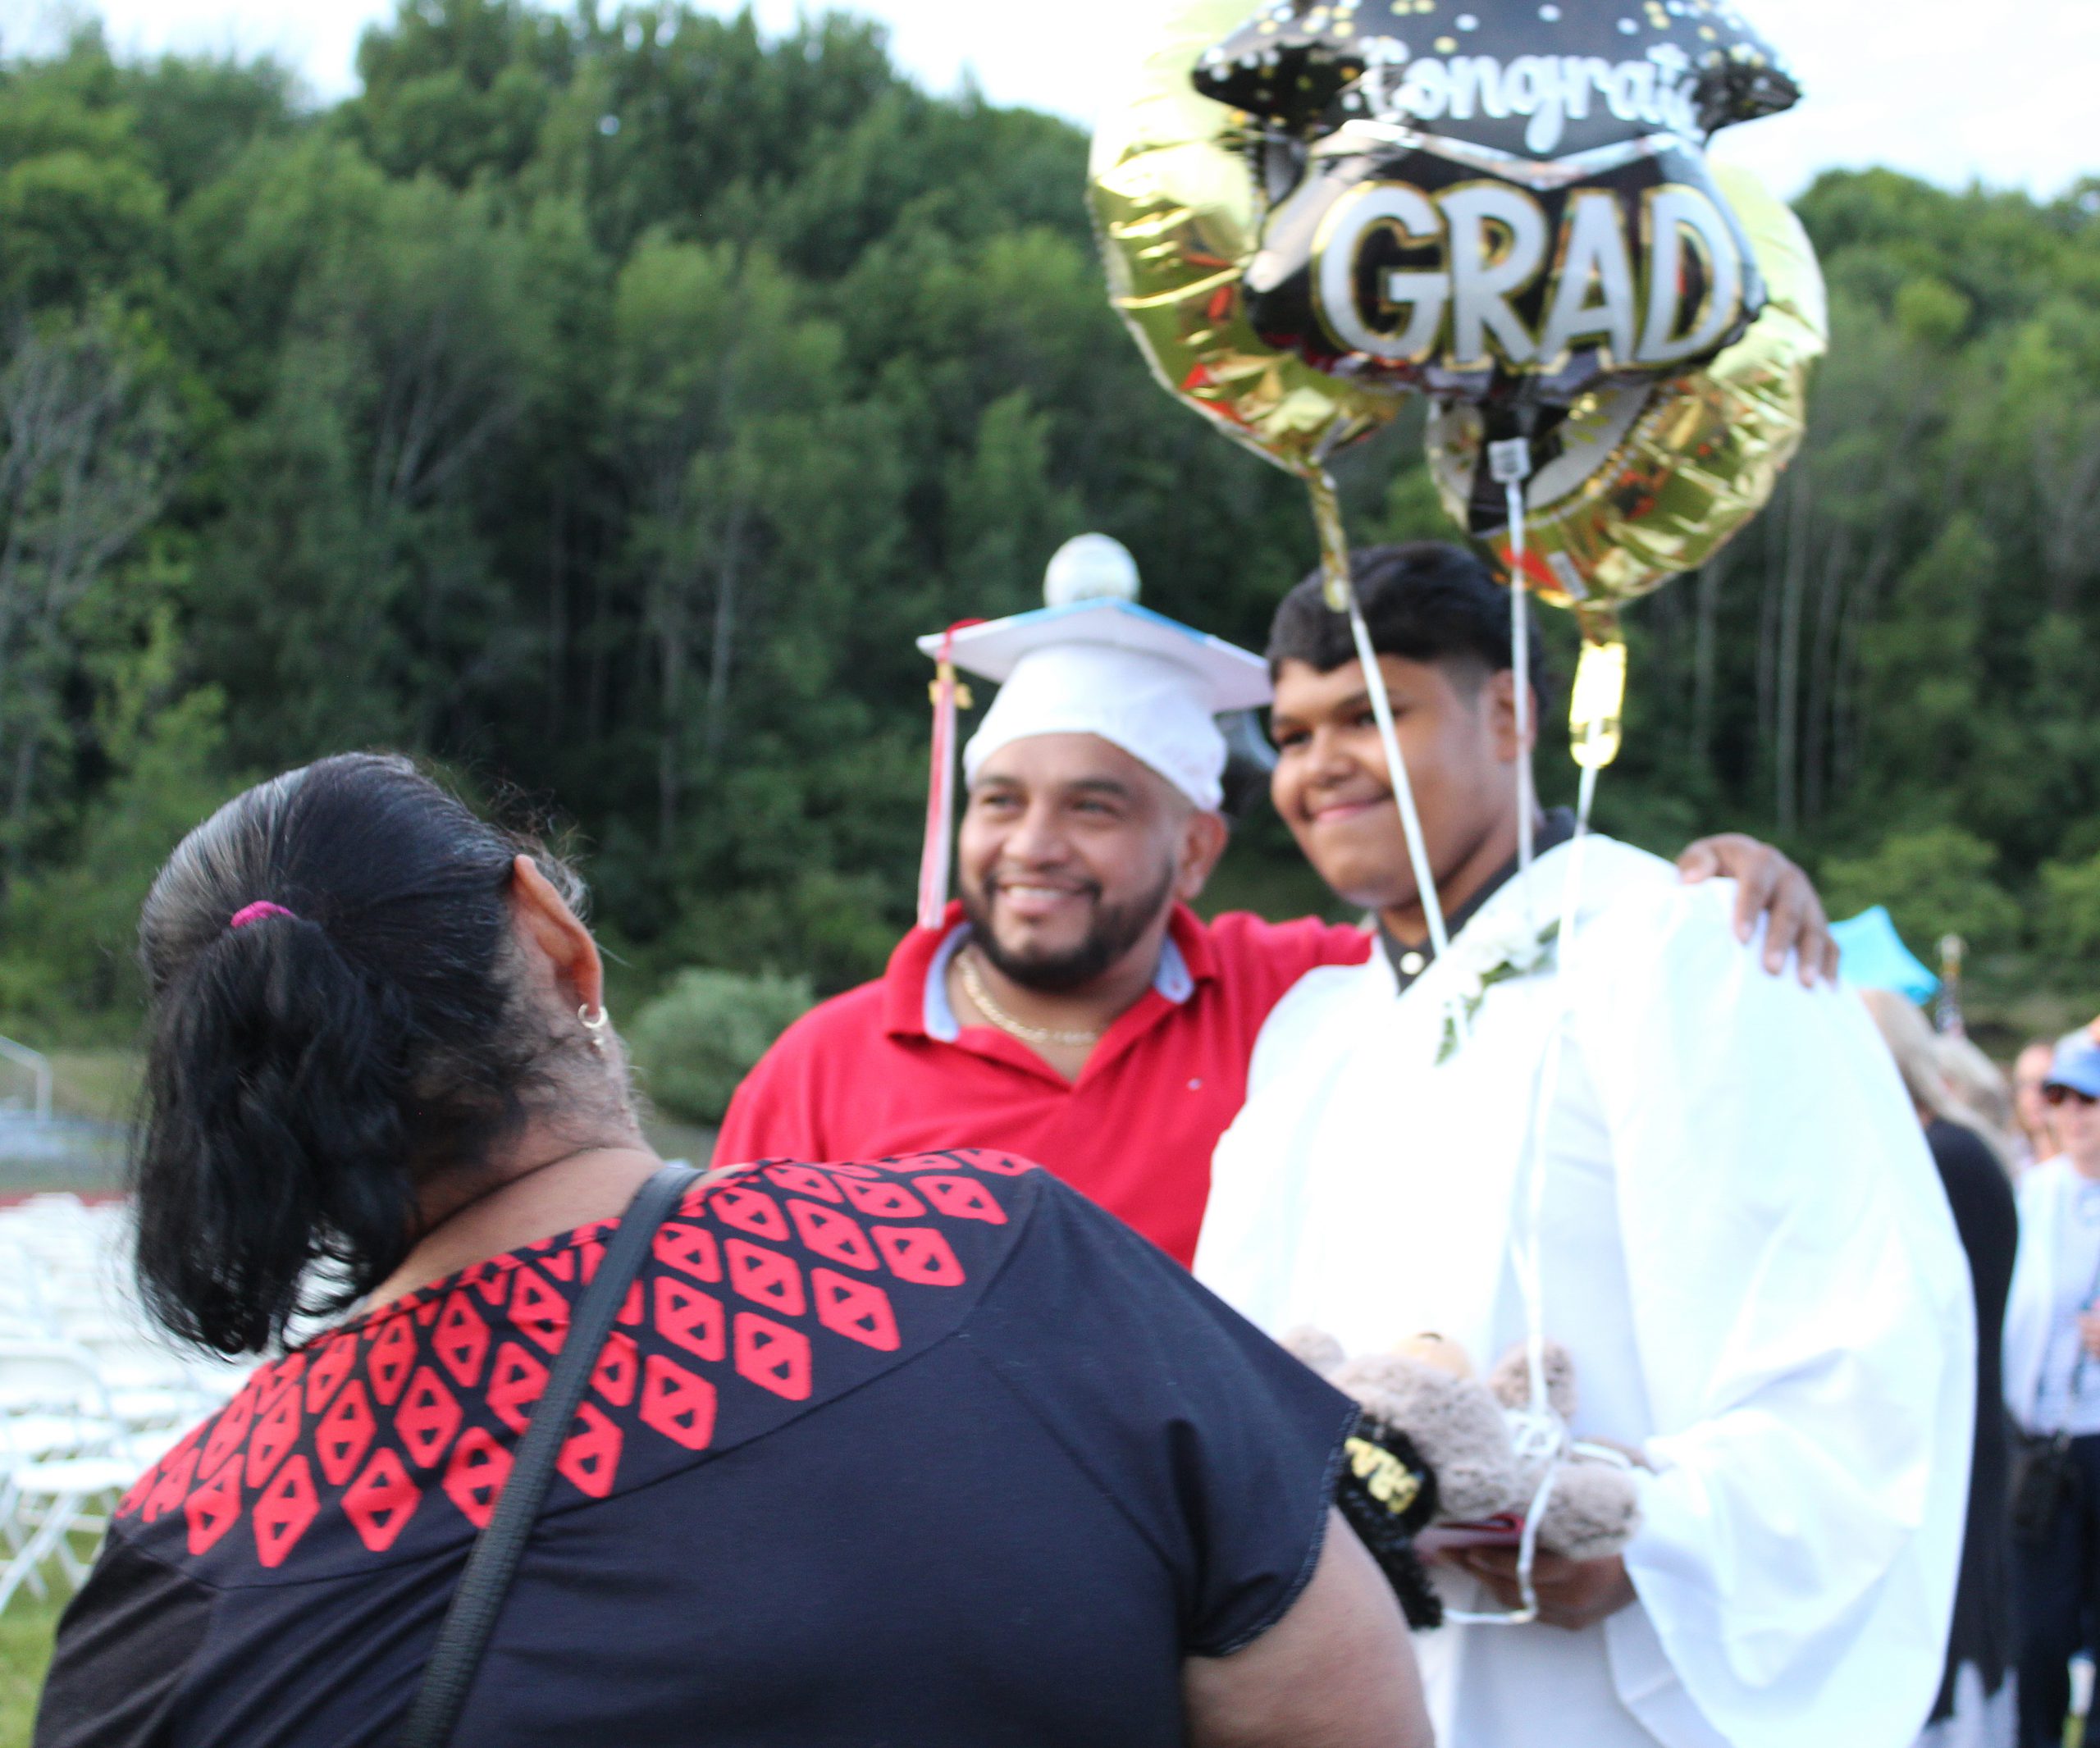 A woman watches as a man poses with a student in a gown holding balloons as the man wears the cap